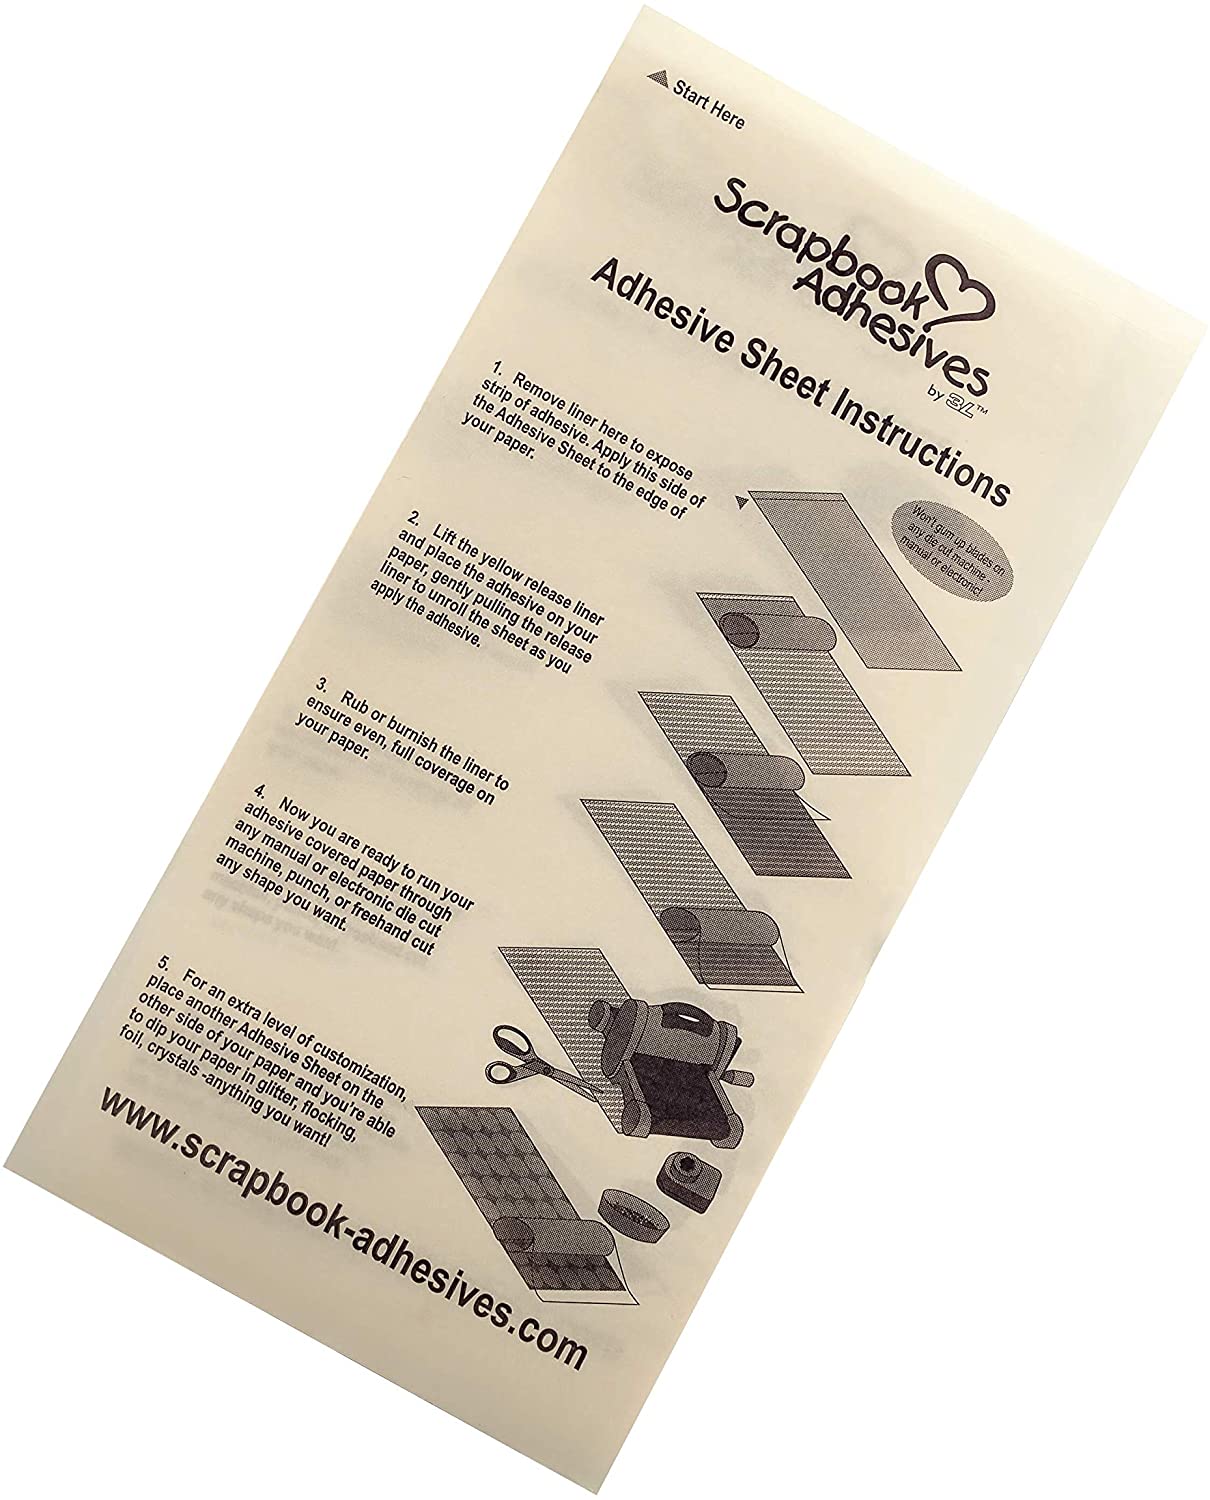 Adhesive Sheets, 4-Inch x 6-Inch, 10-Pack